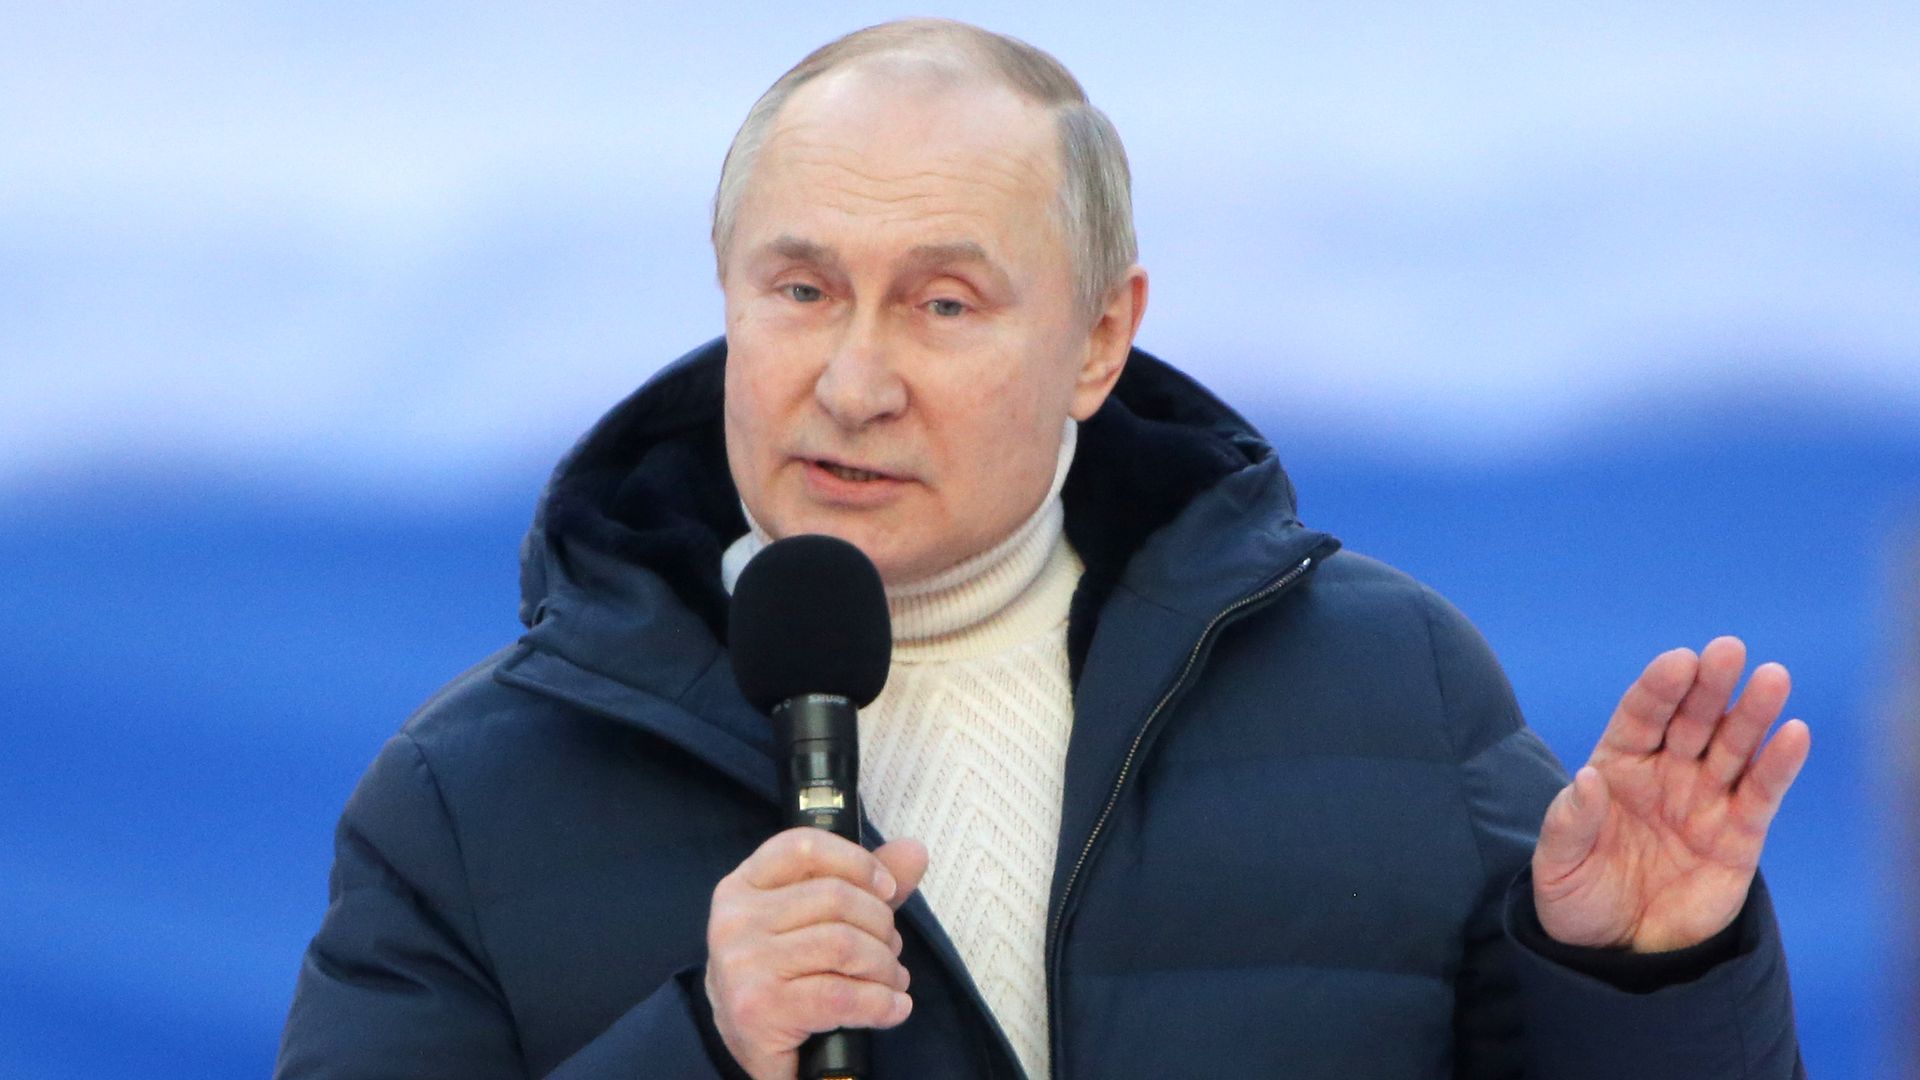 Russian President Vladimir Putin speaks during a concert marking the anniversary of the annexation of Crimea, on March 18, 2022 in Moscow, Russia. 